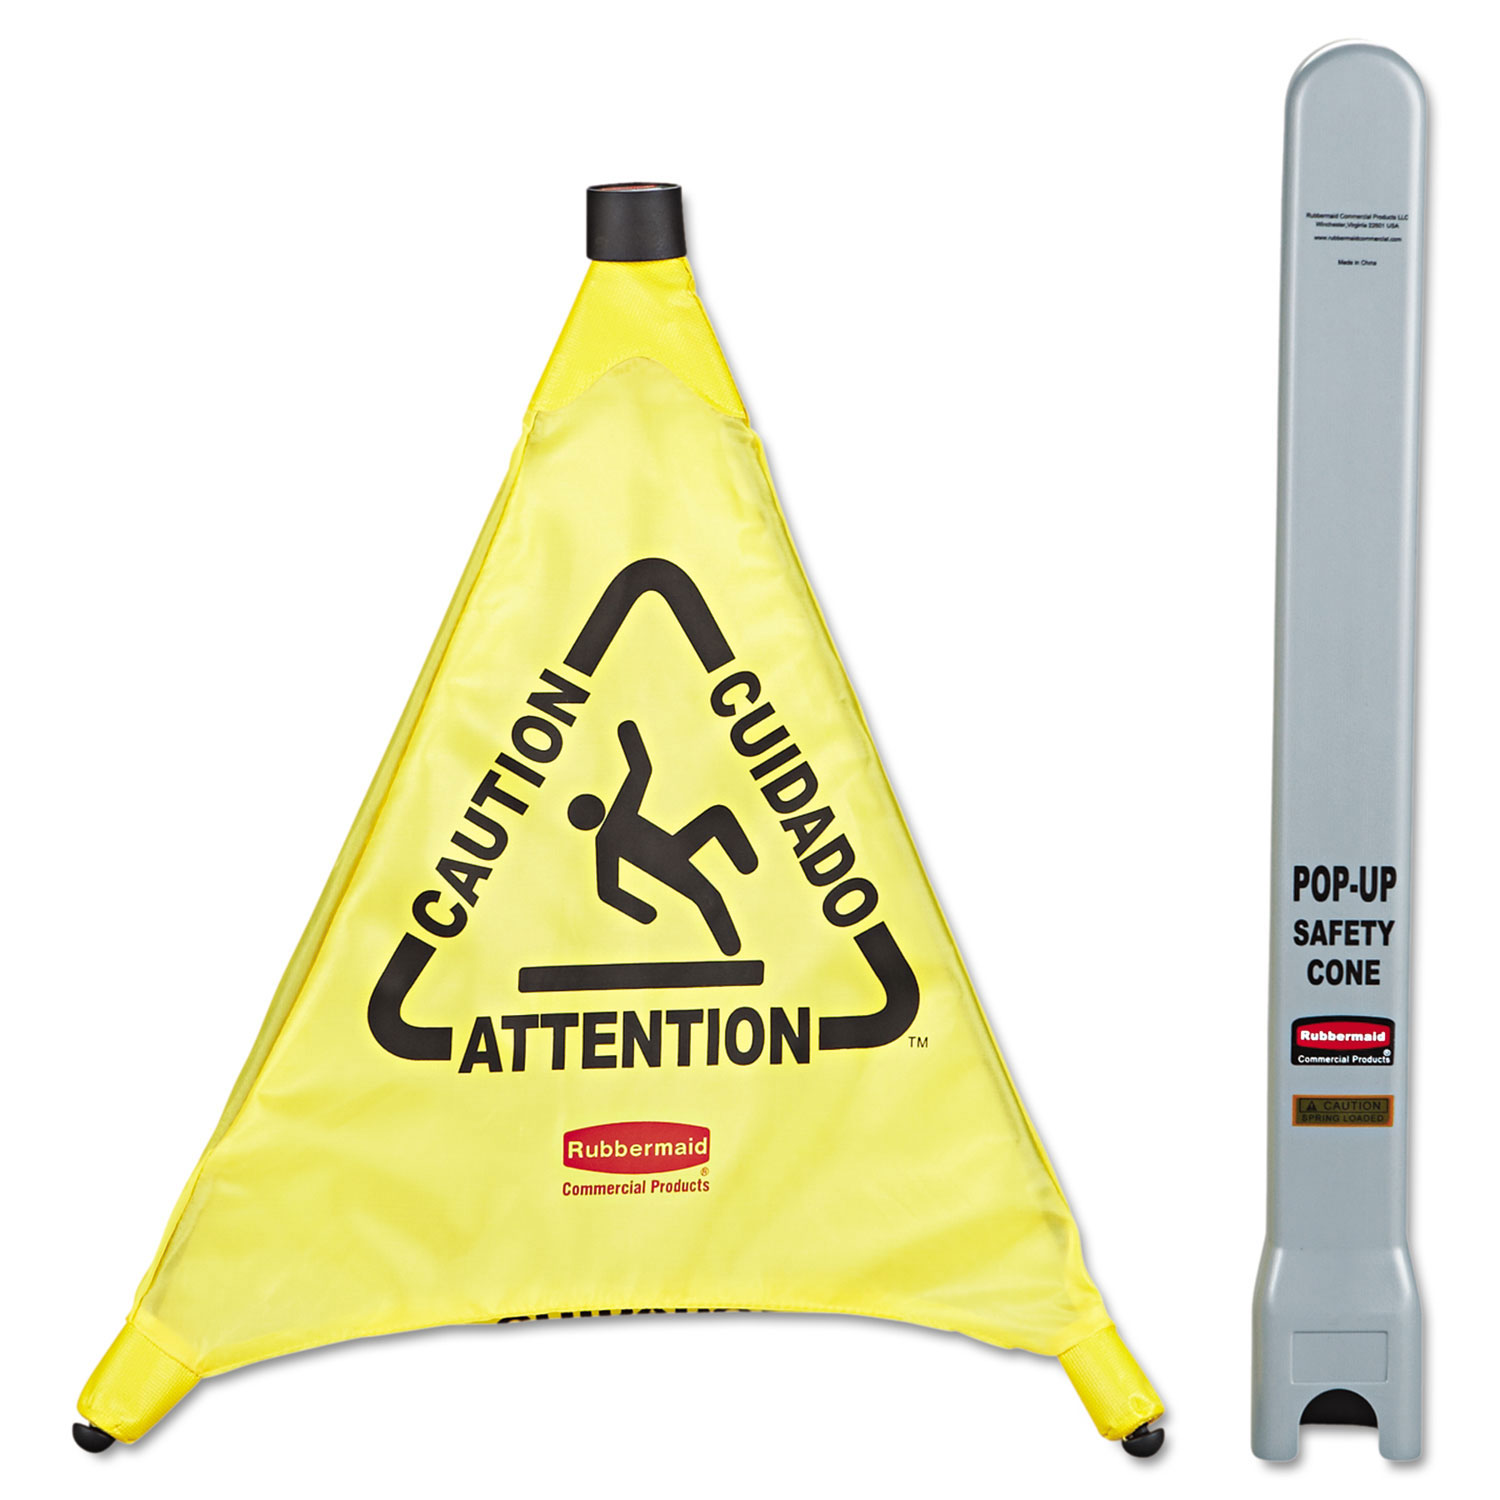 Rubbermaid Multilingual Caution Pop Up Safety Cone Sided Fabric